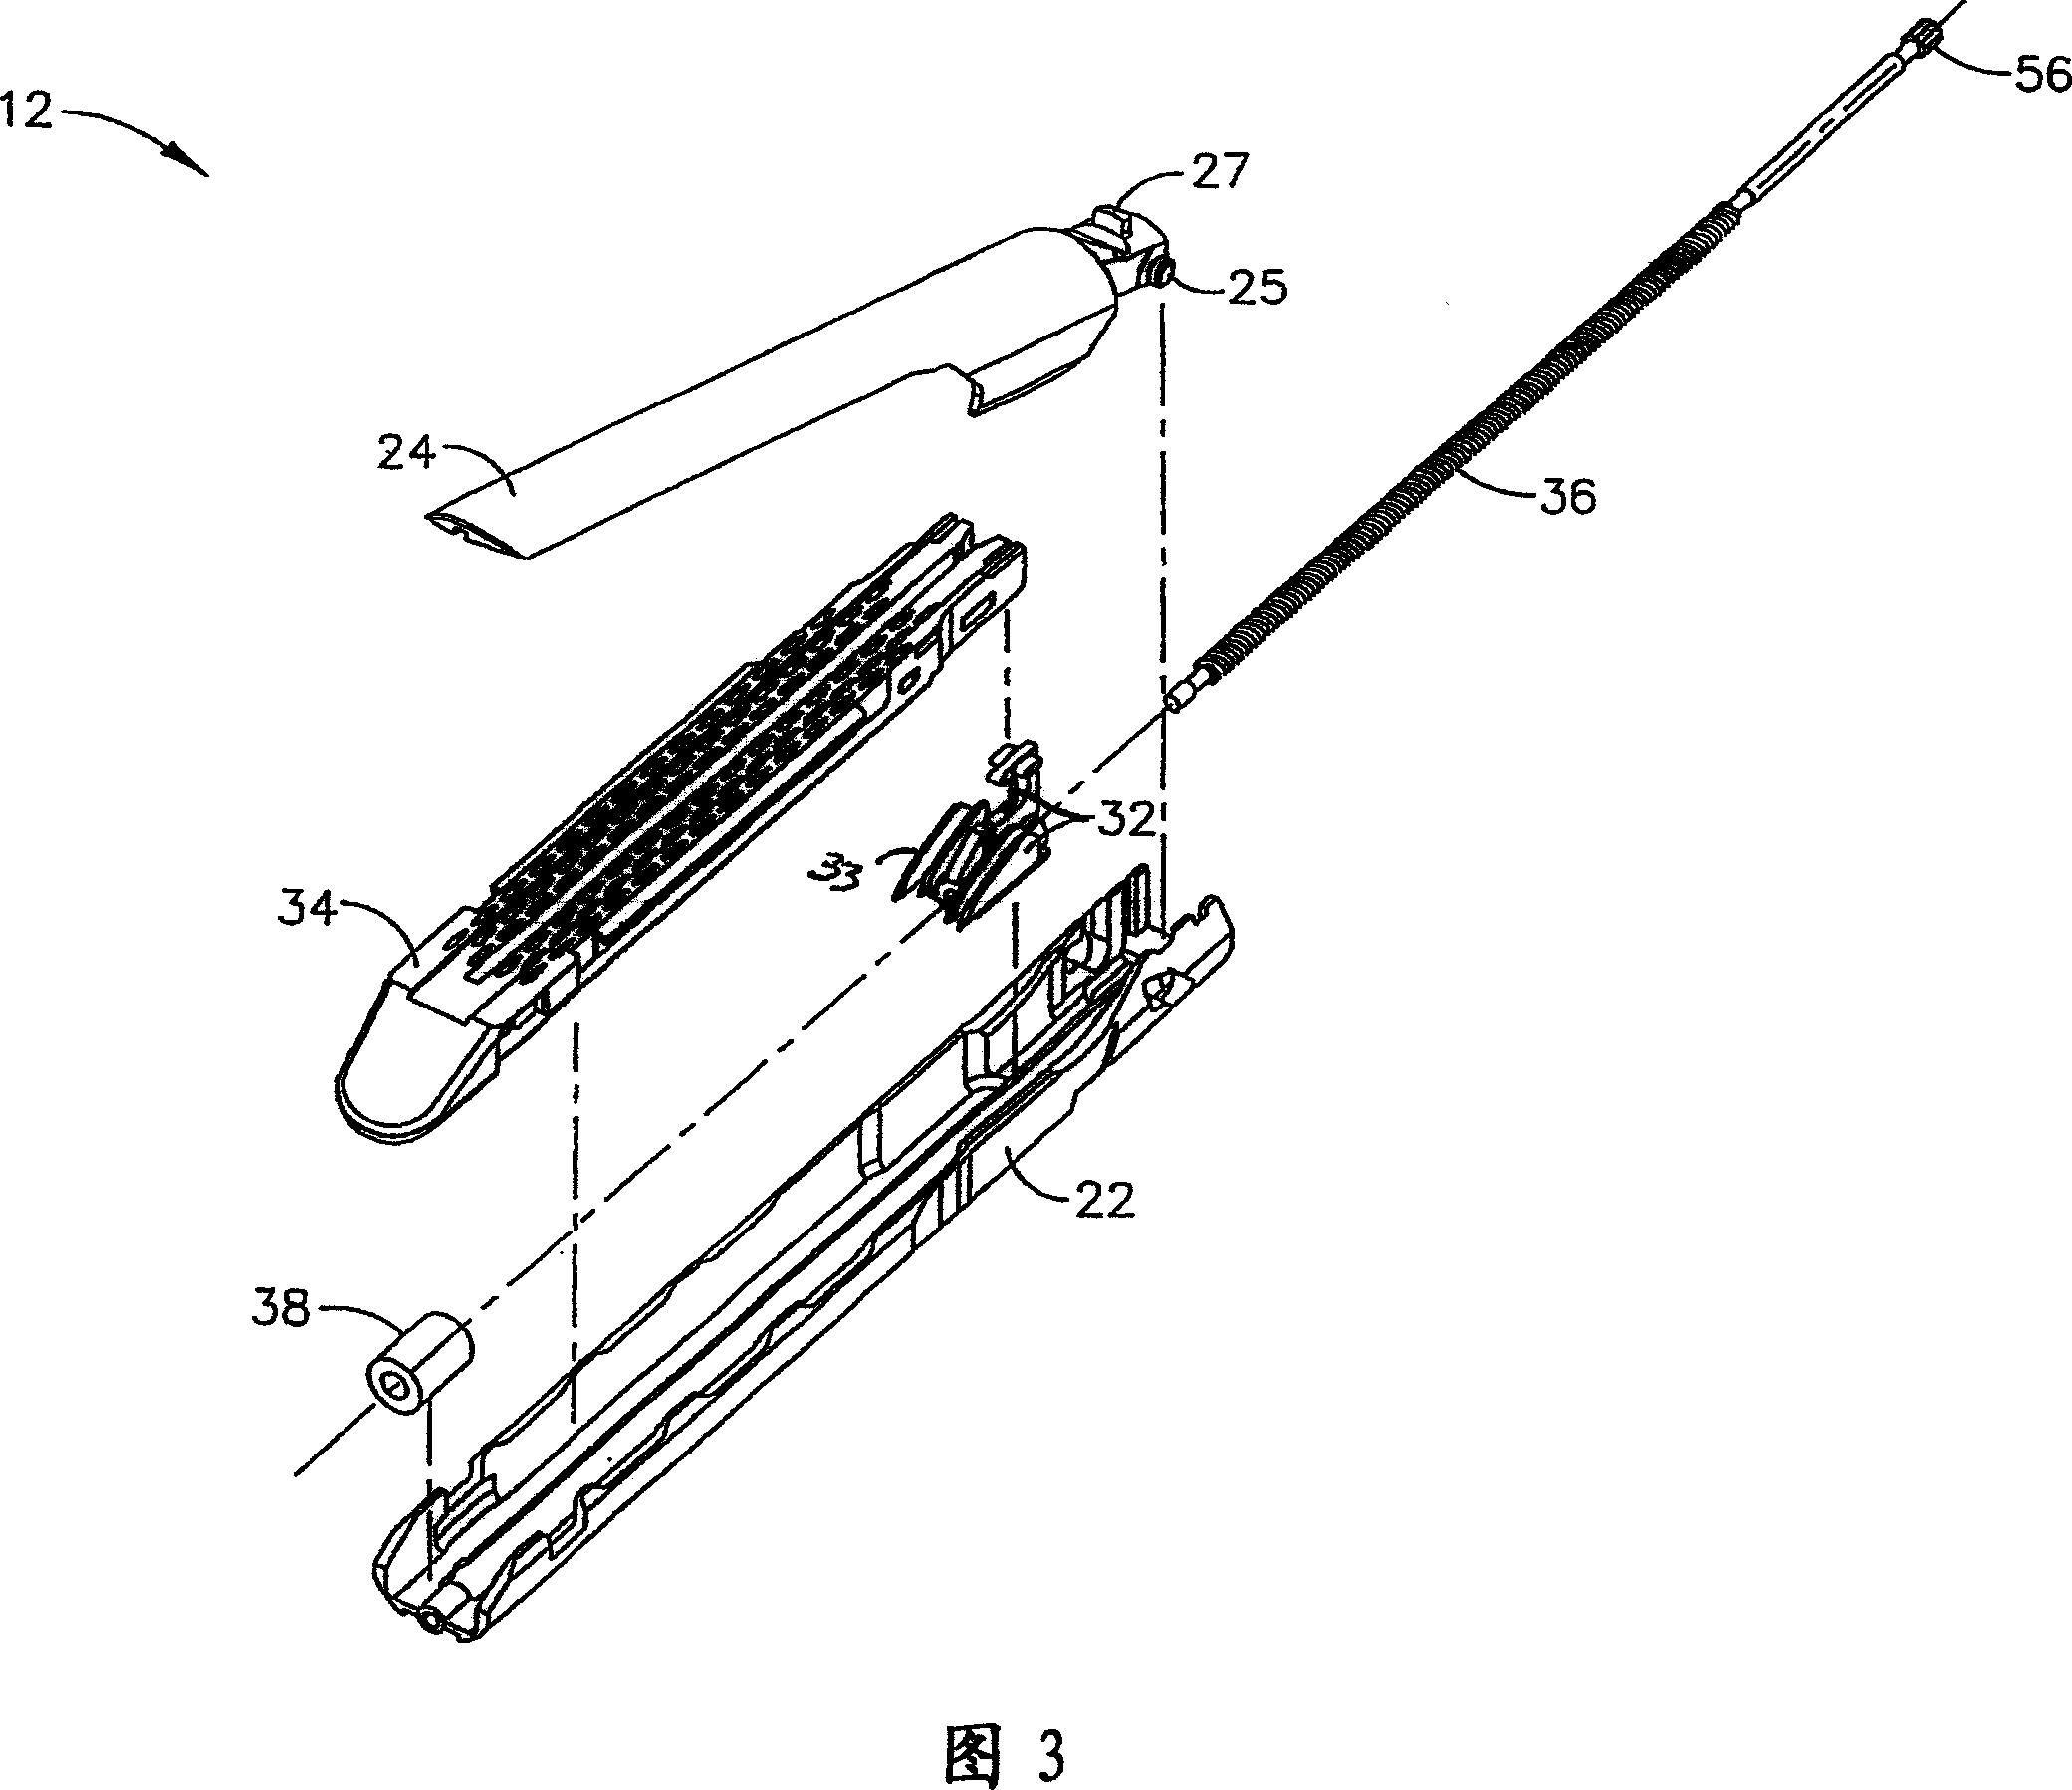 Motor-driven surgical cutting and fastening instrument with tactile position feedback